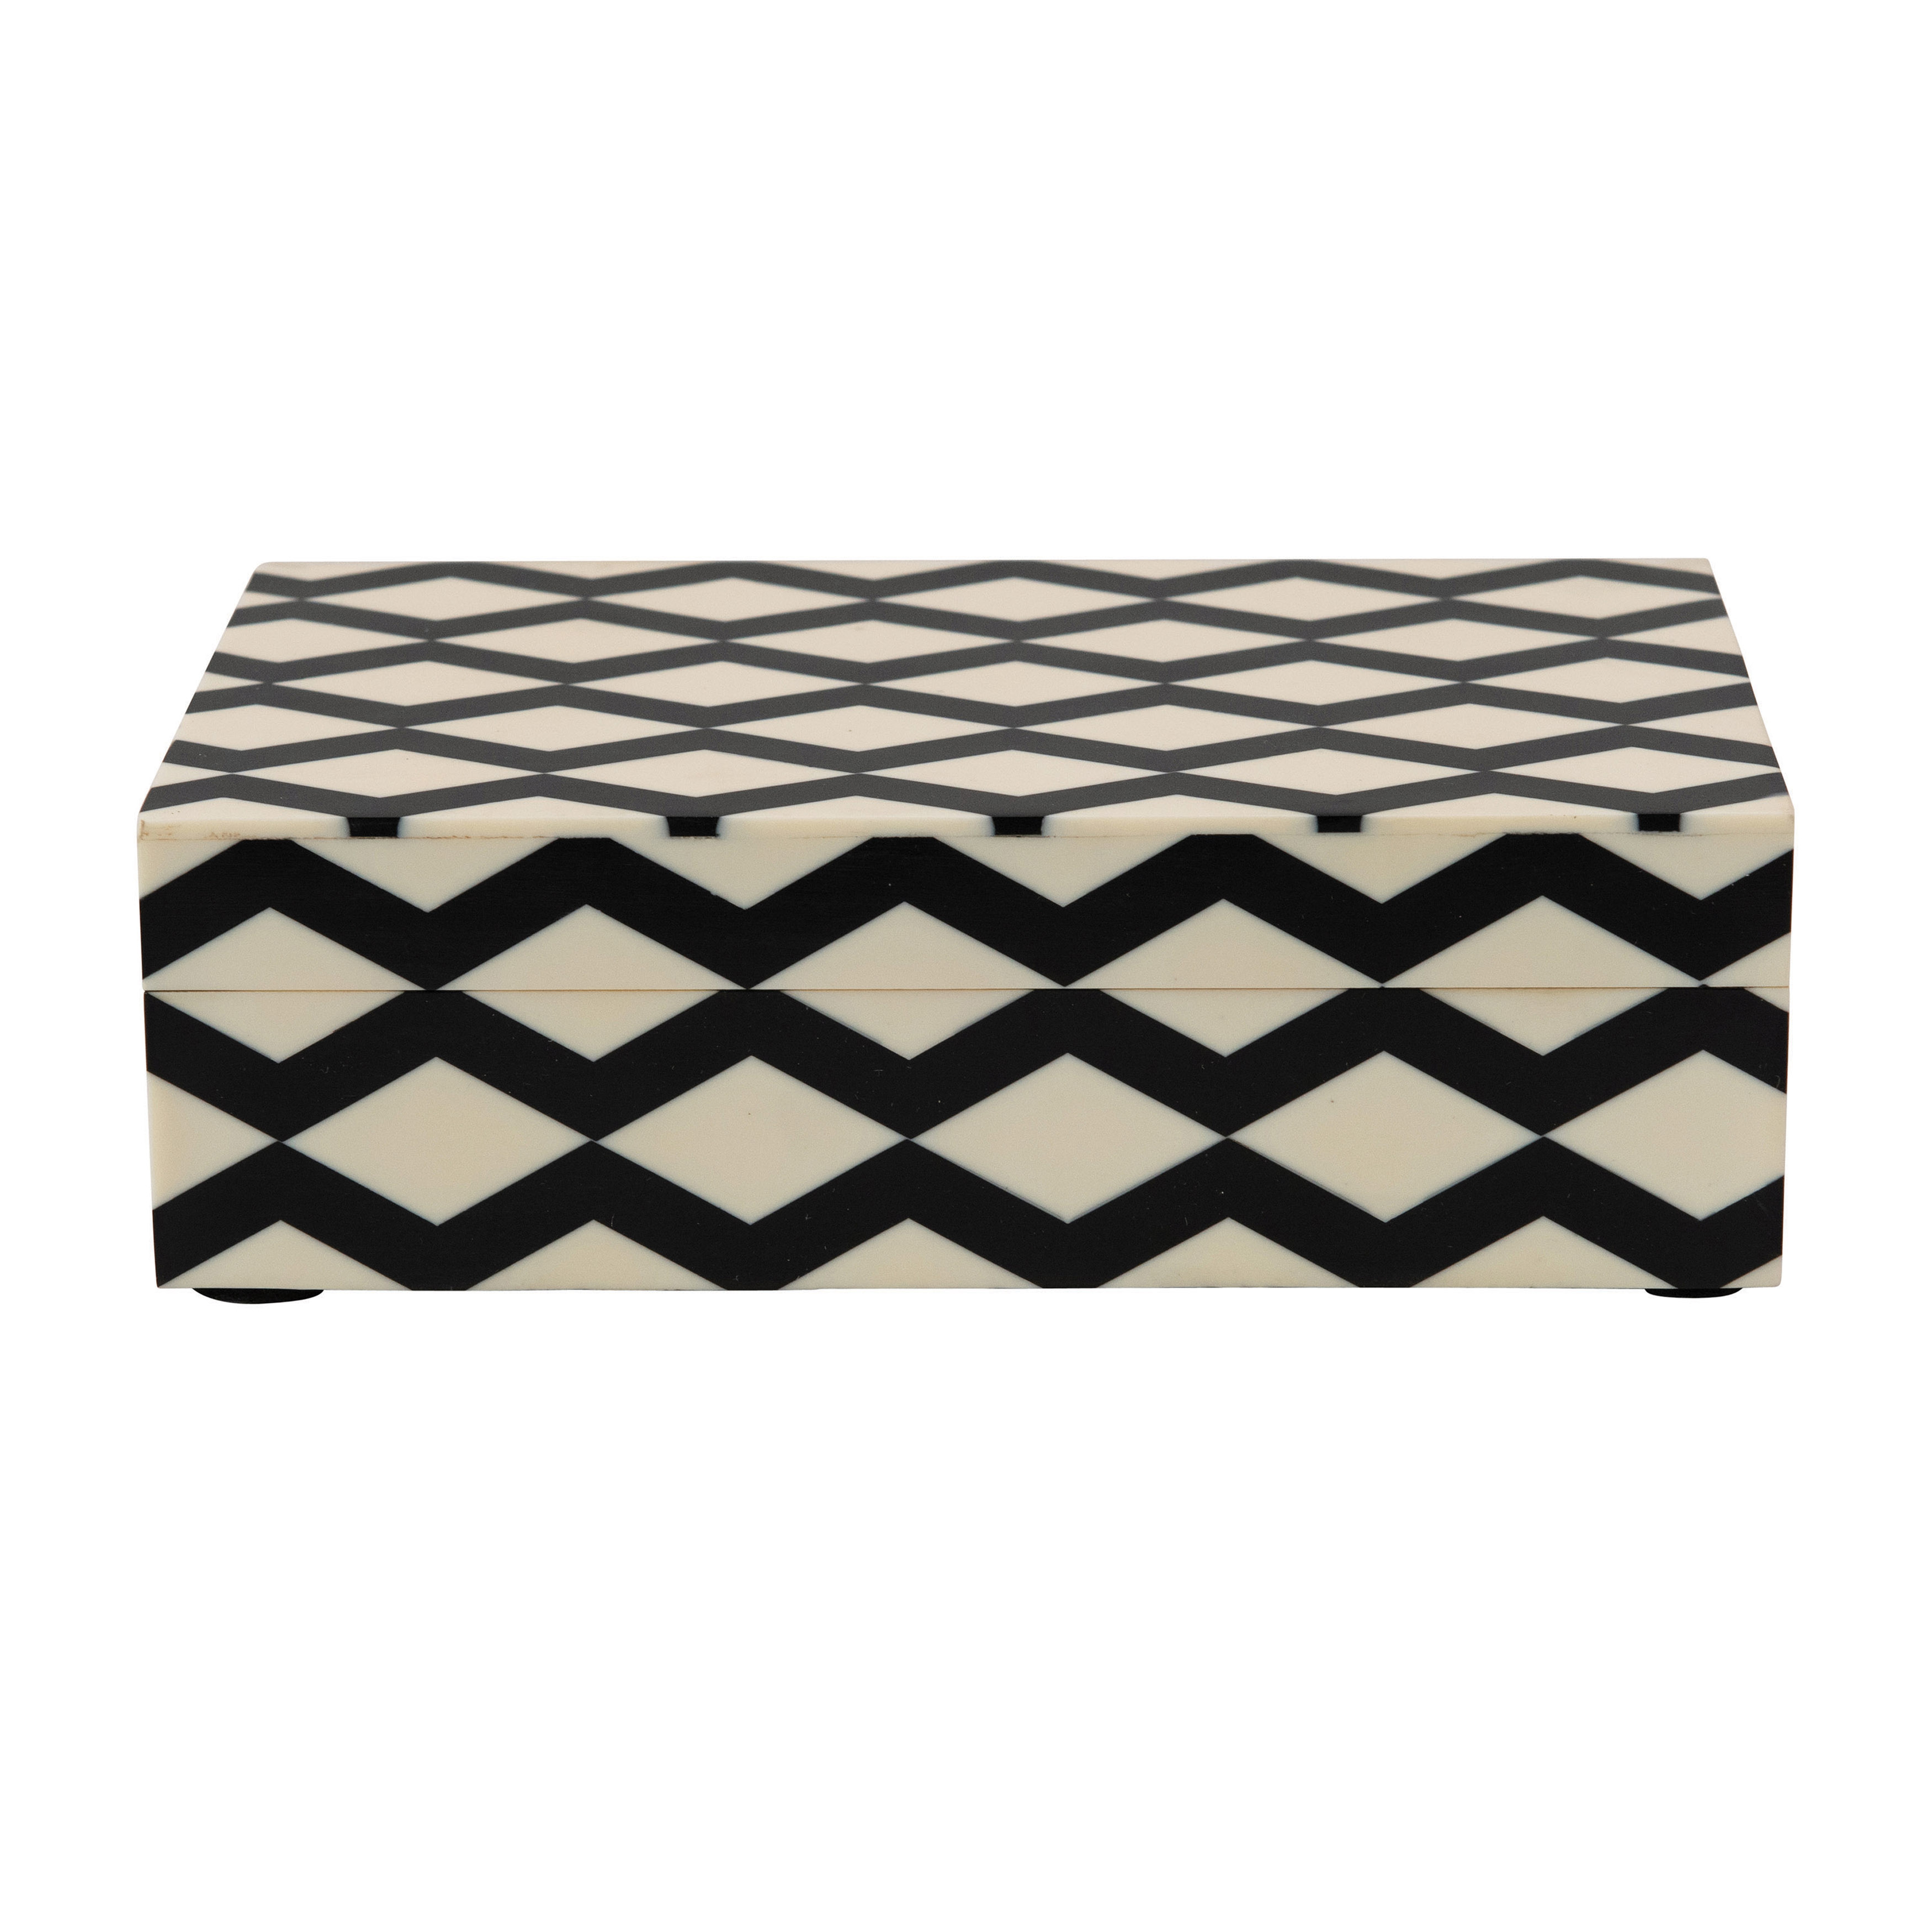 Resin & MDF Box with Lid & Pattern Inlay, Black & White - Nomad Home